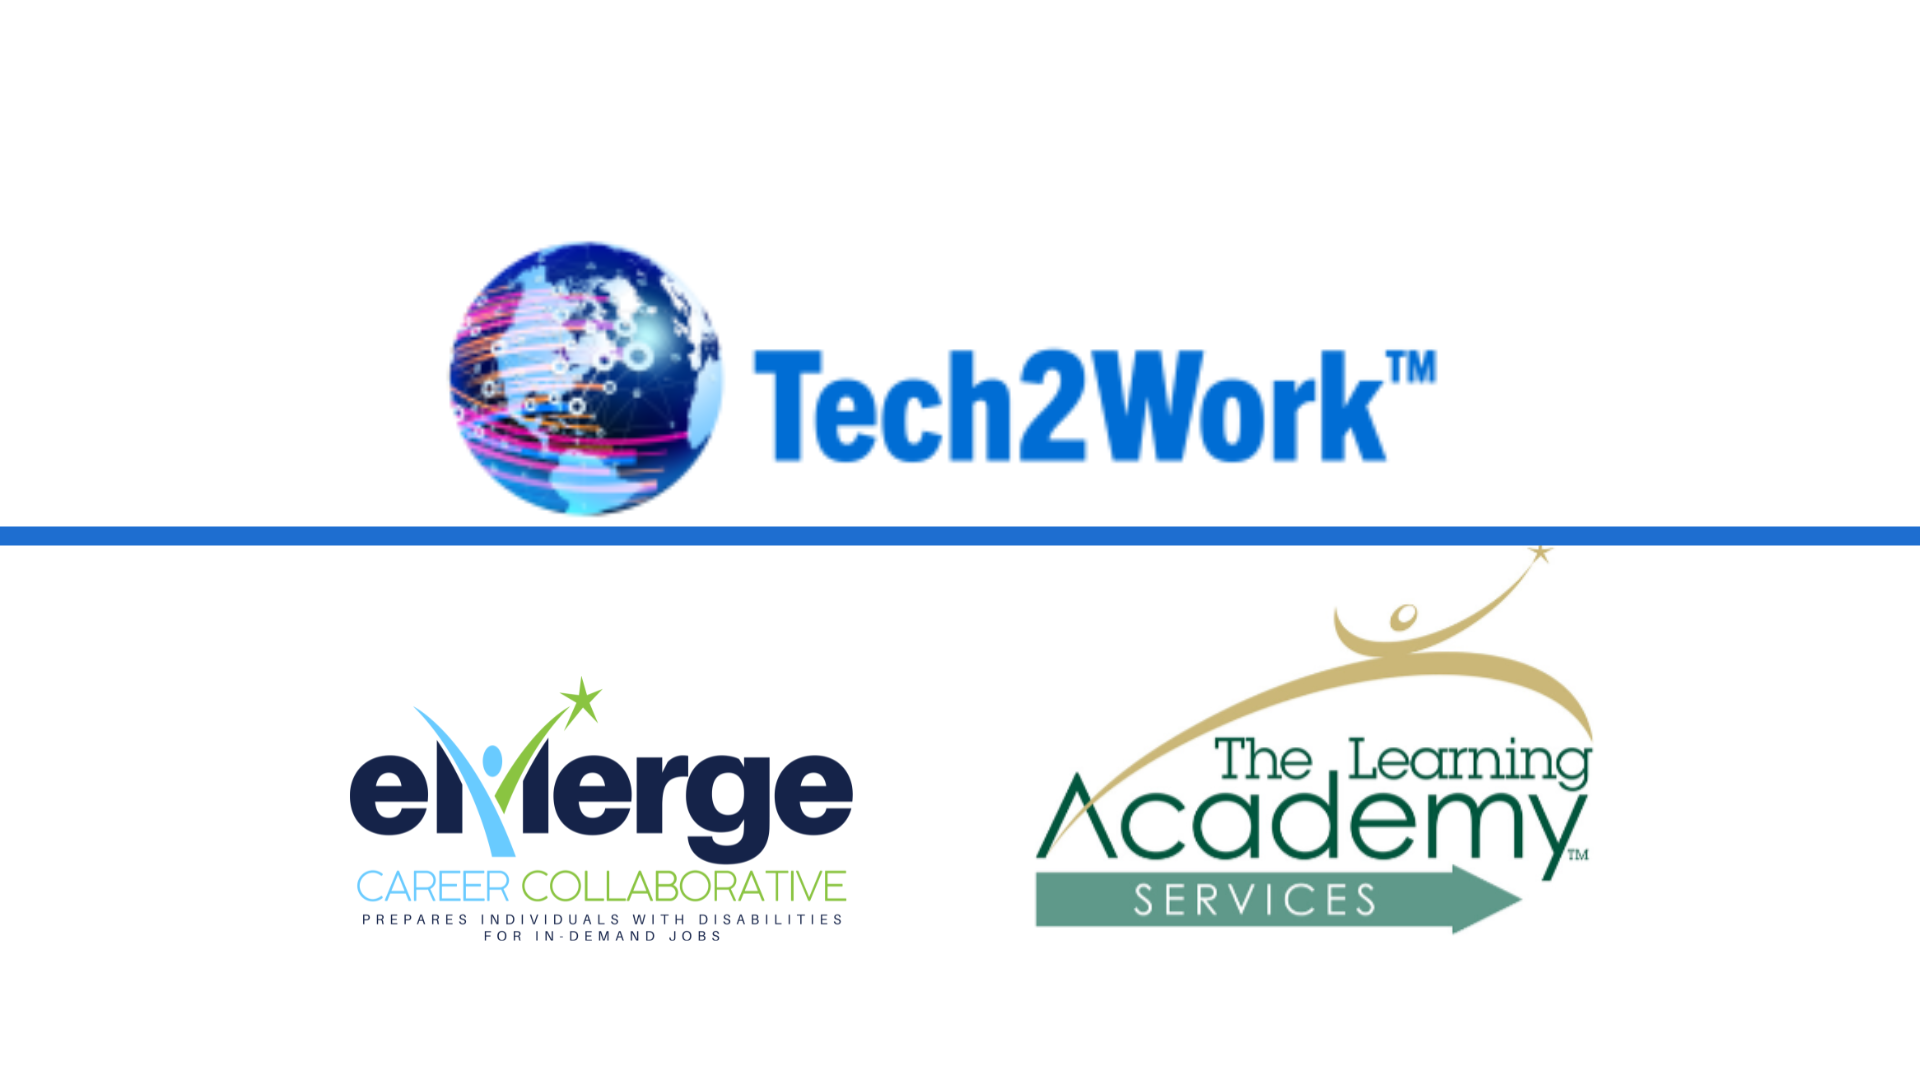 Group of logos including Tech2Work, eMerge, and The Learning Academy.